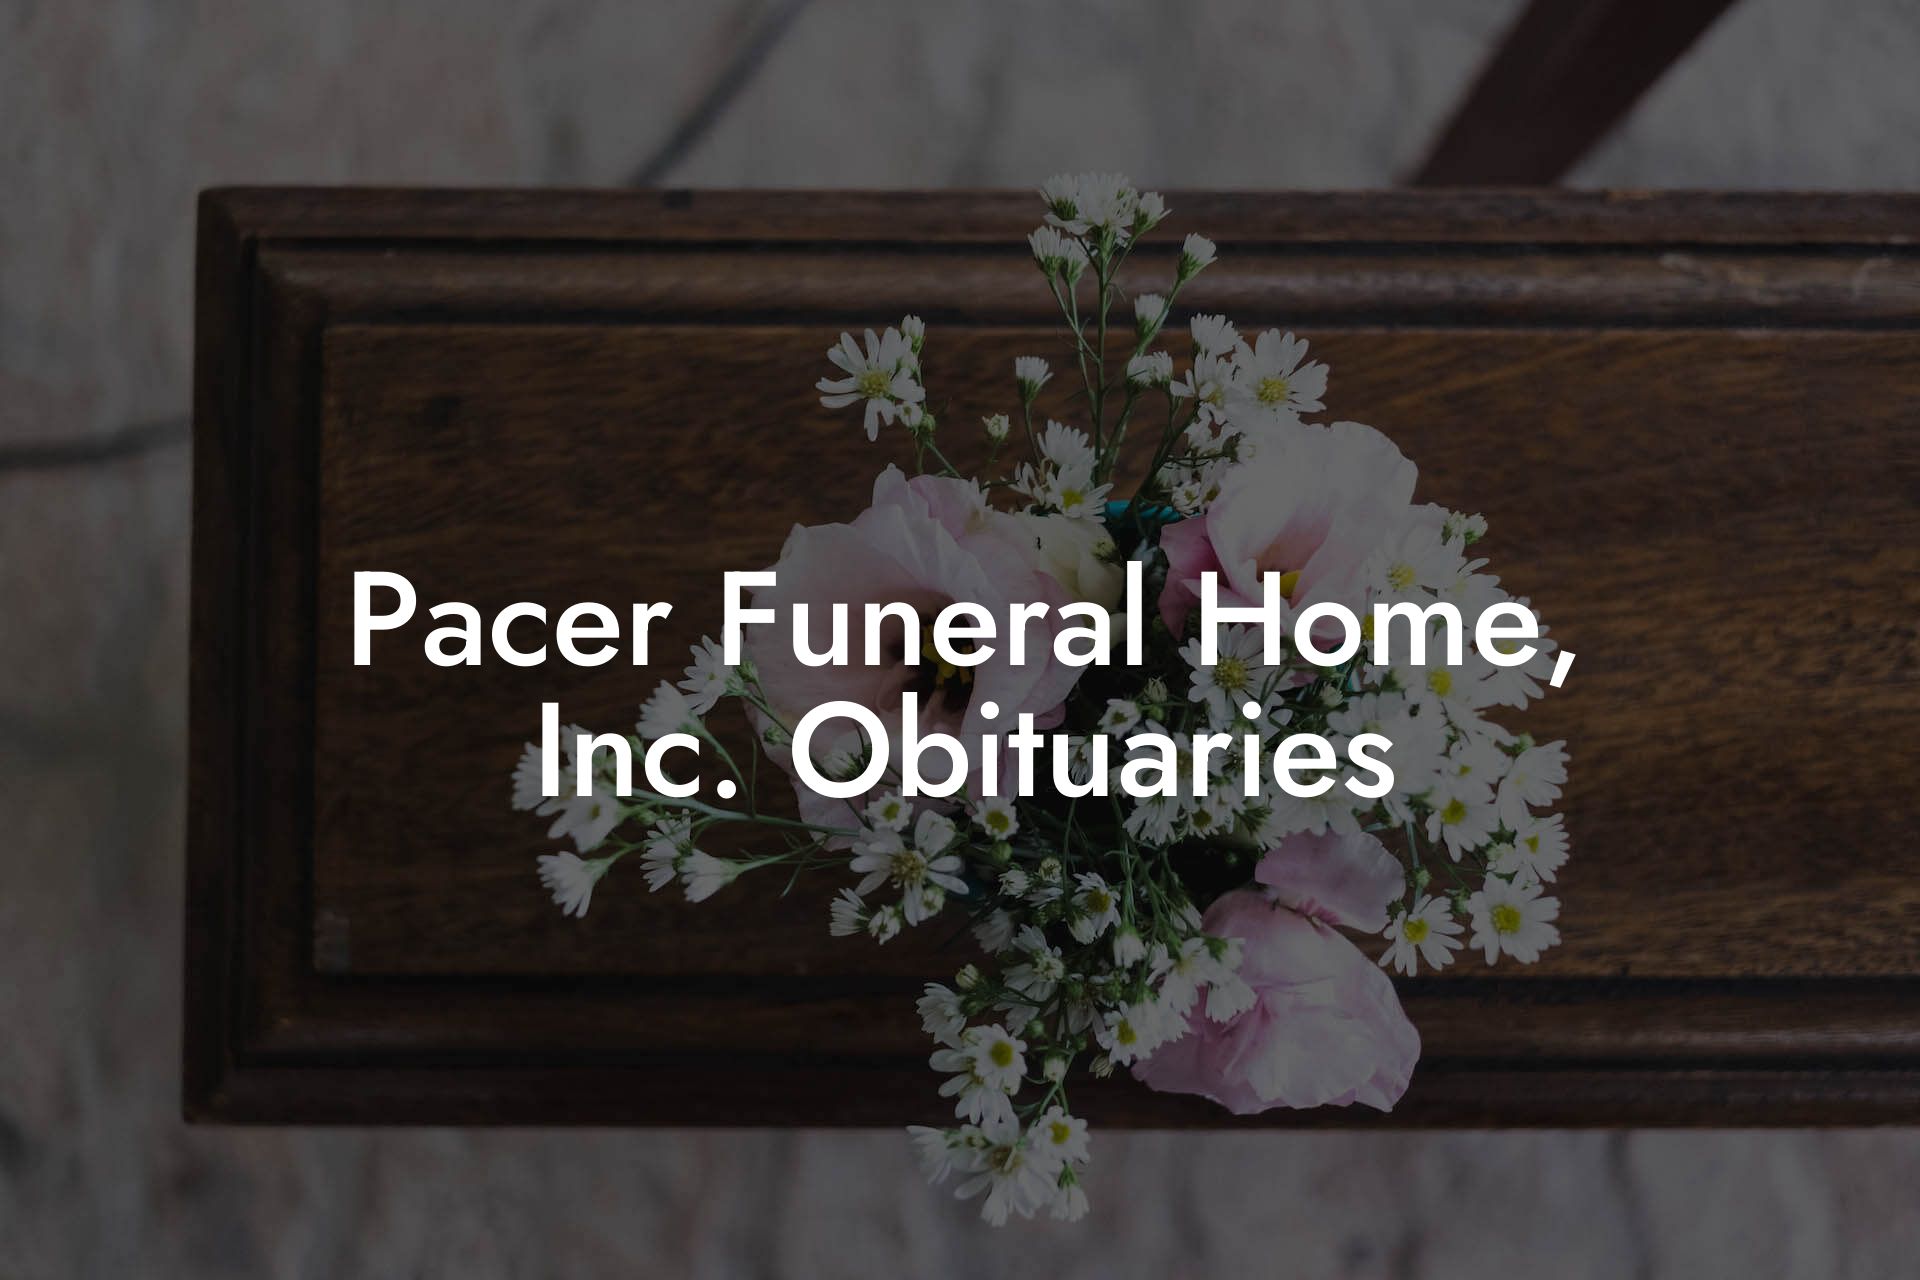 Pacer Funeral Home, Inc. Obituaries